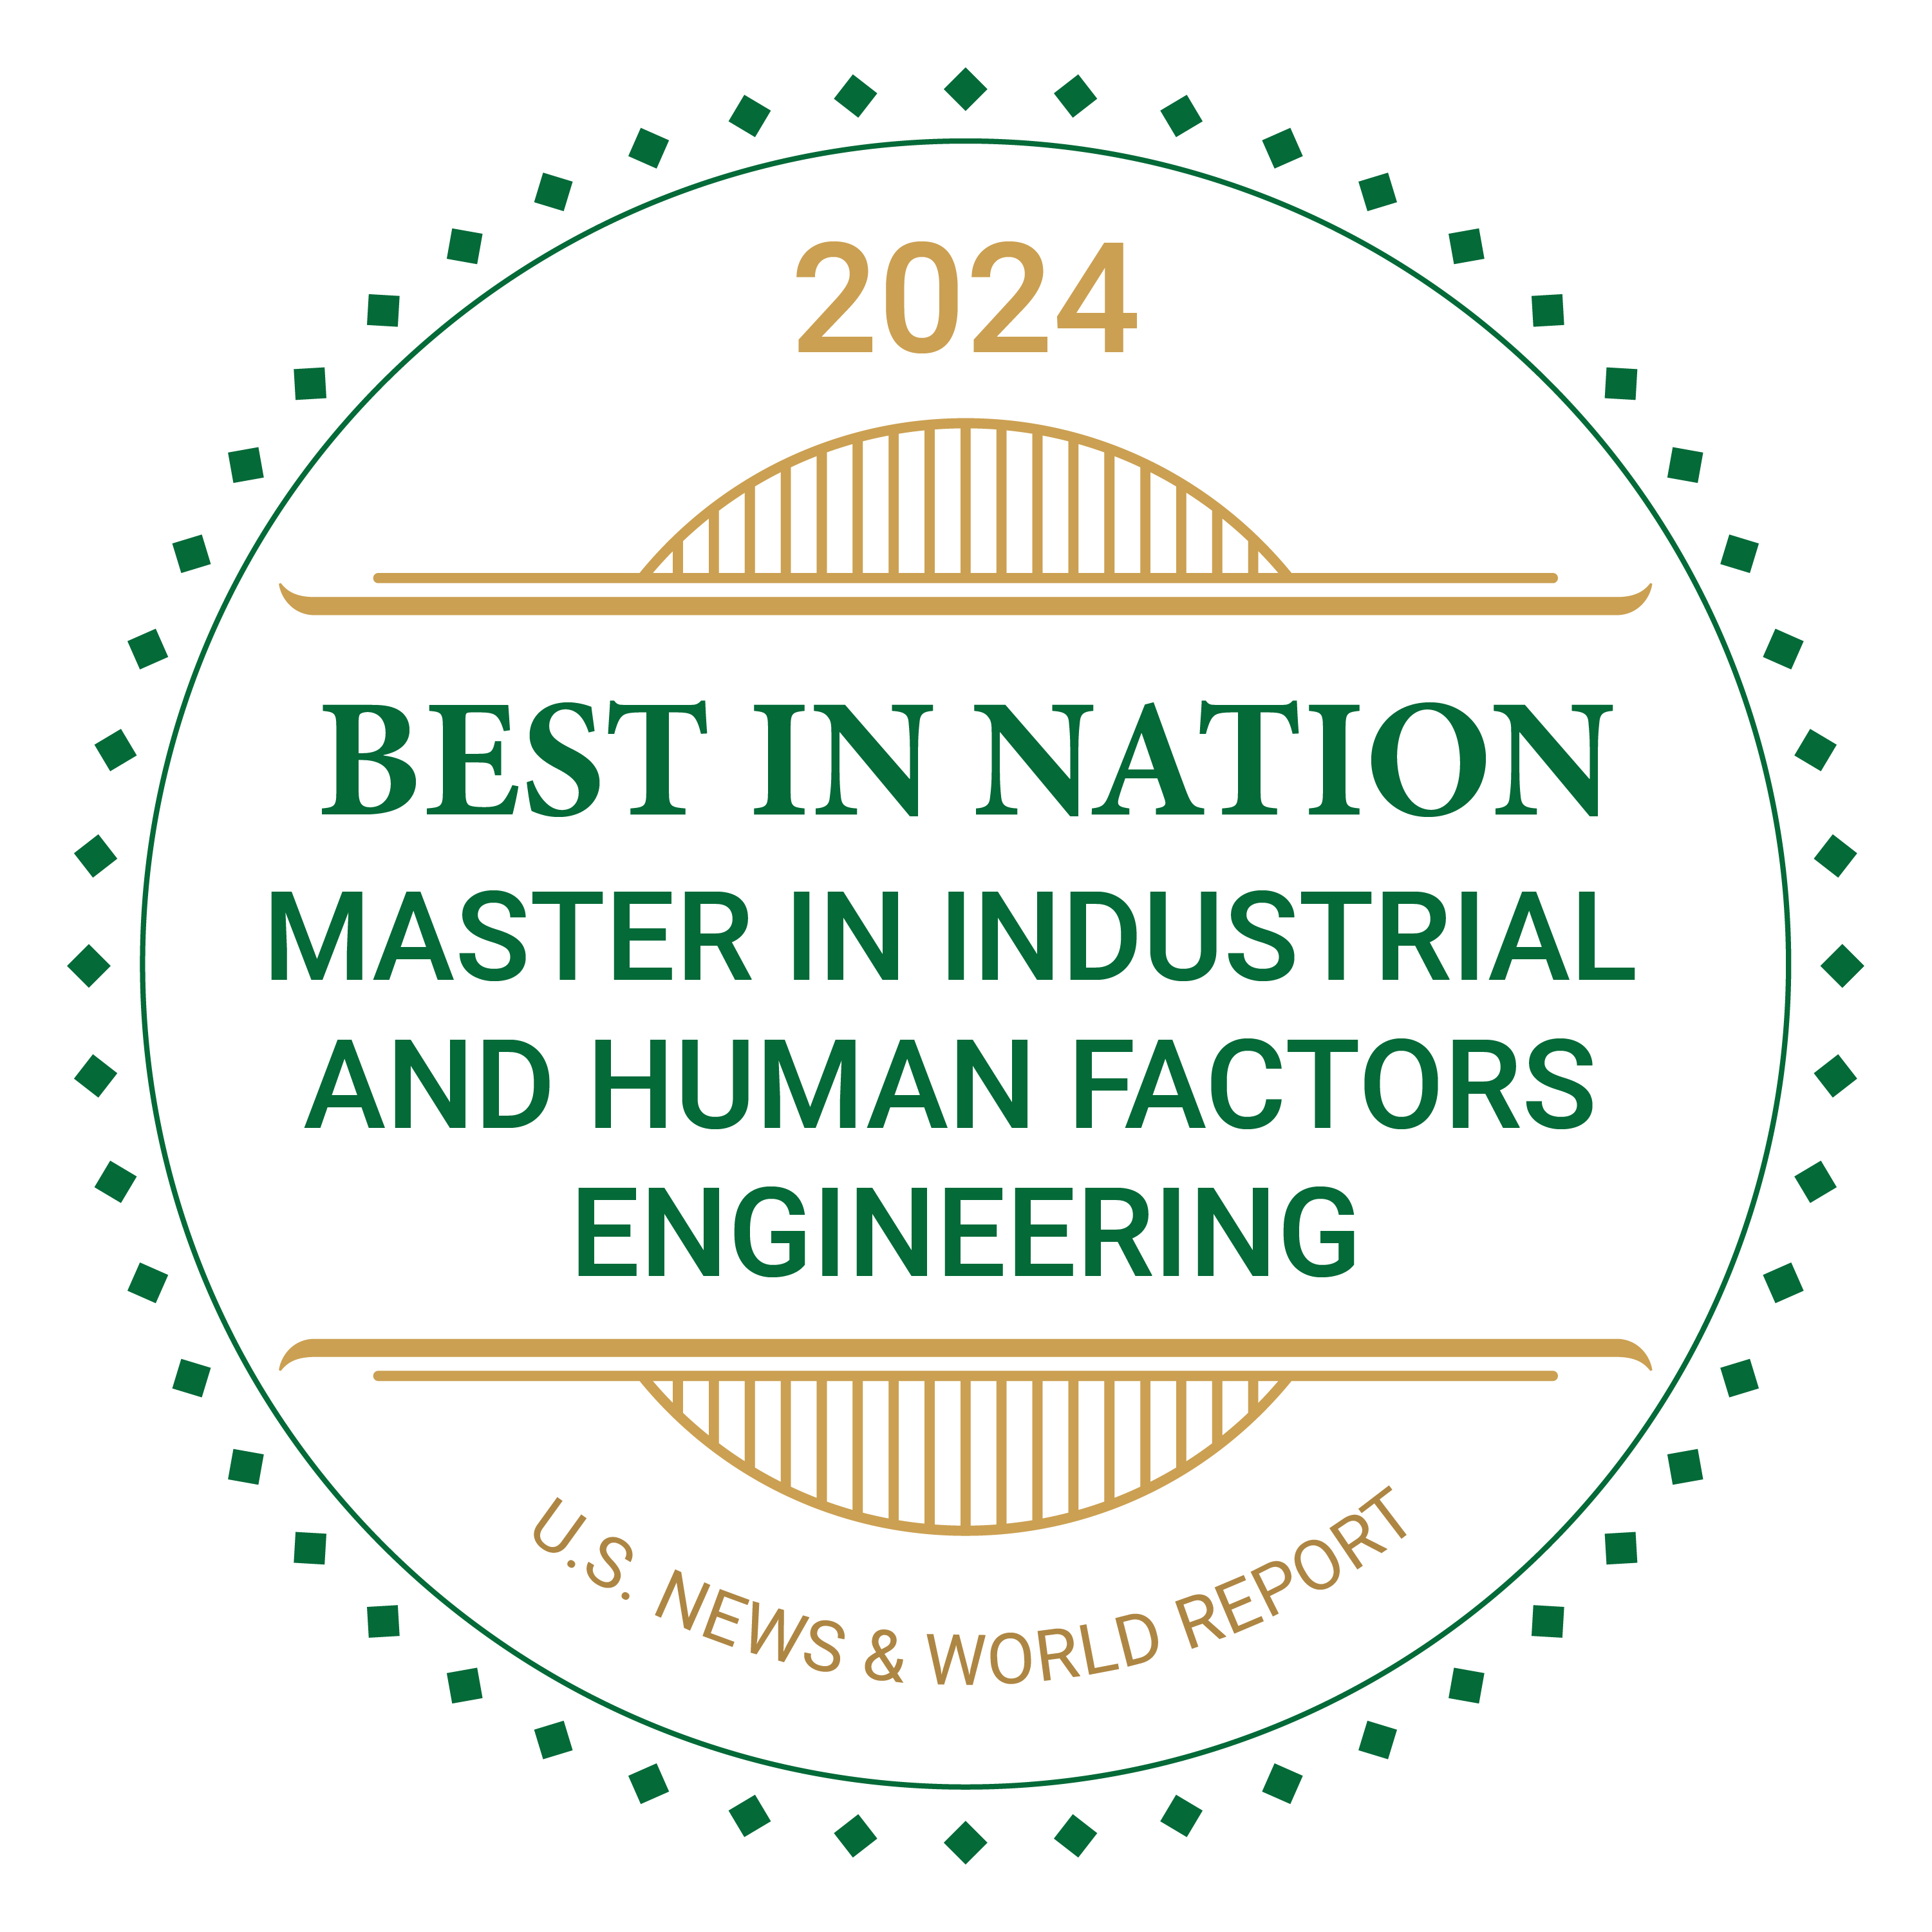 2024 Best In Nation Master in Industrial and Human Factors Engineering US News and World Report